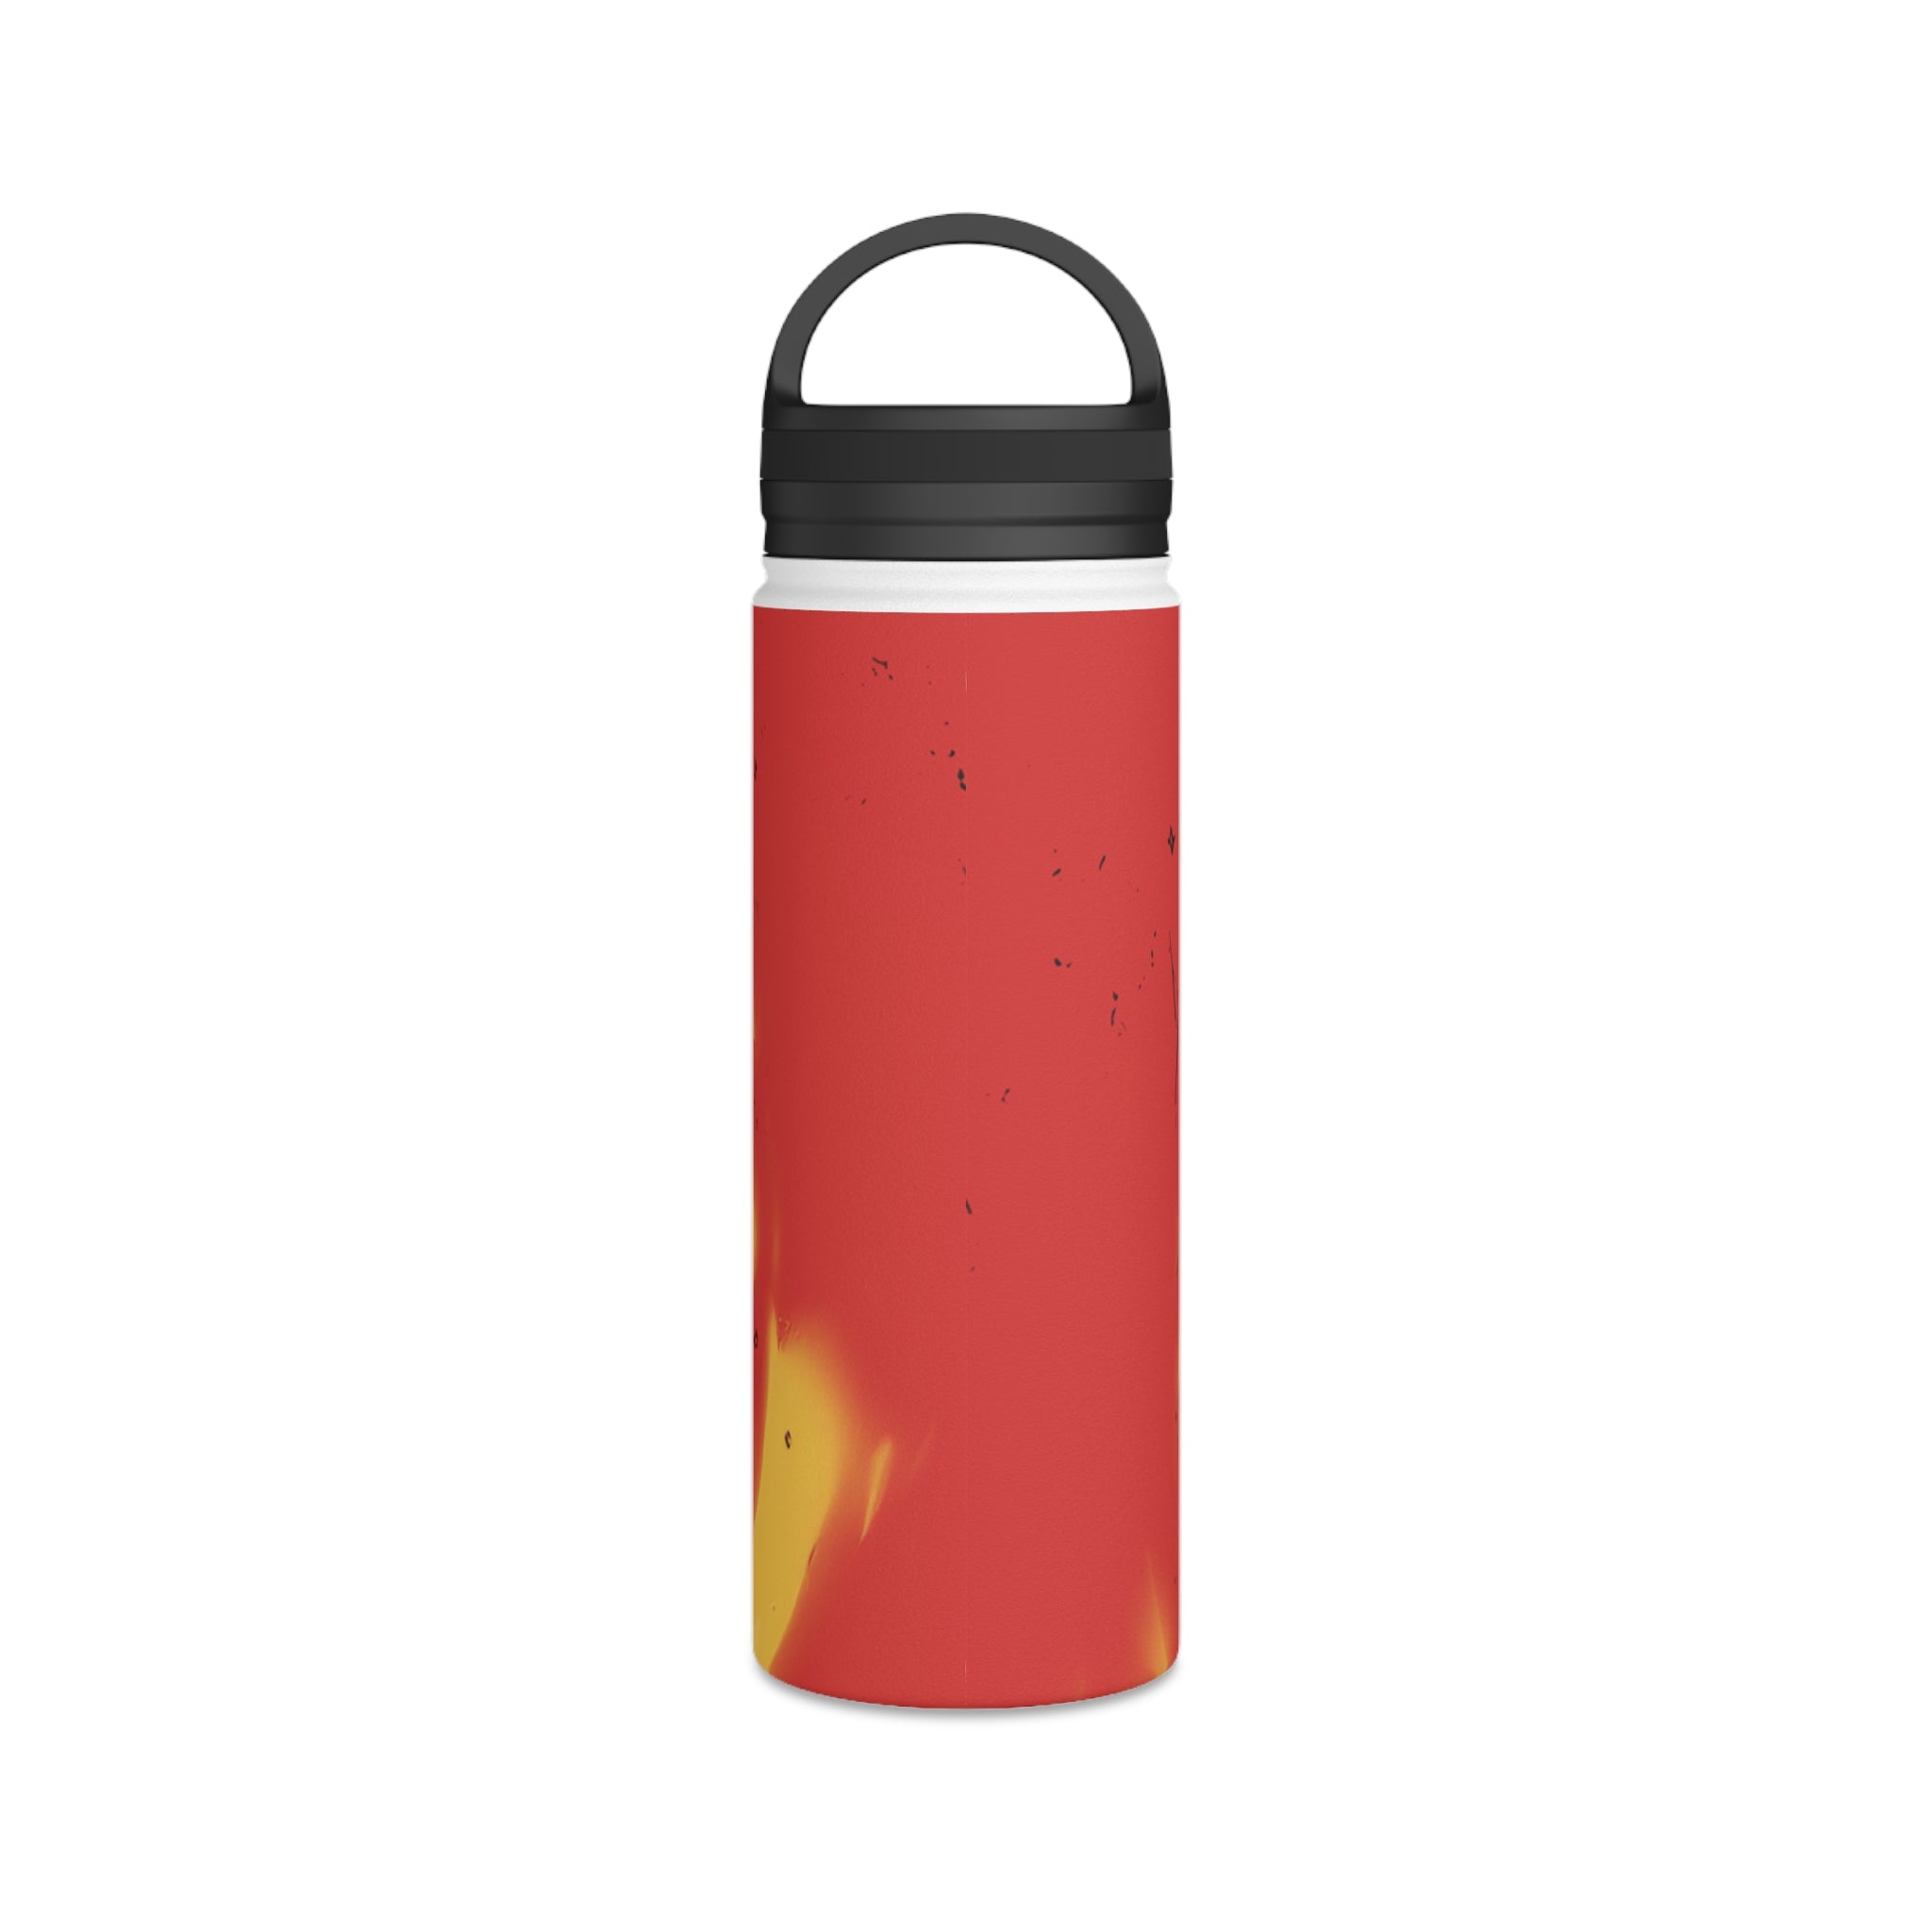 Yes! Yes! Water Bottle Stainless steel water bottle with Skibidi toilet against flames on white background